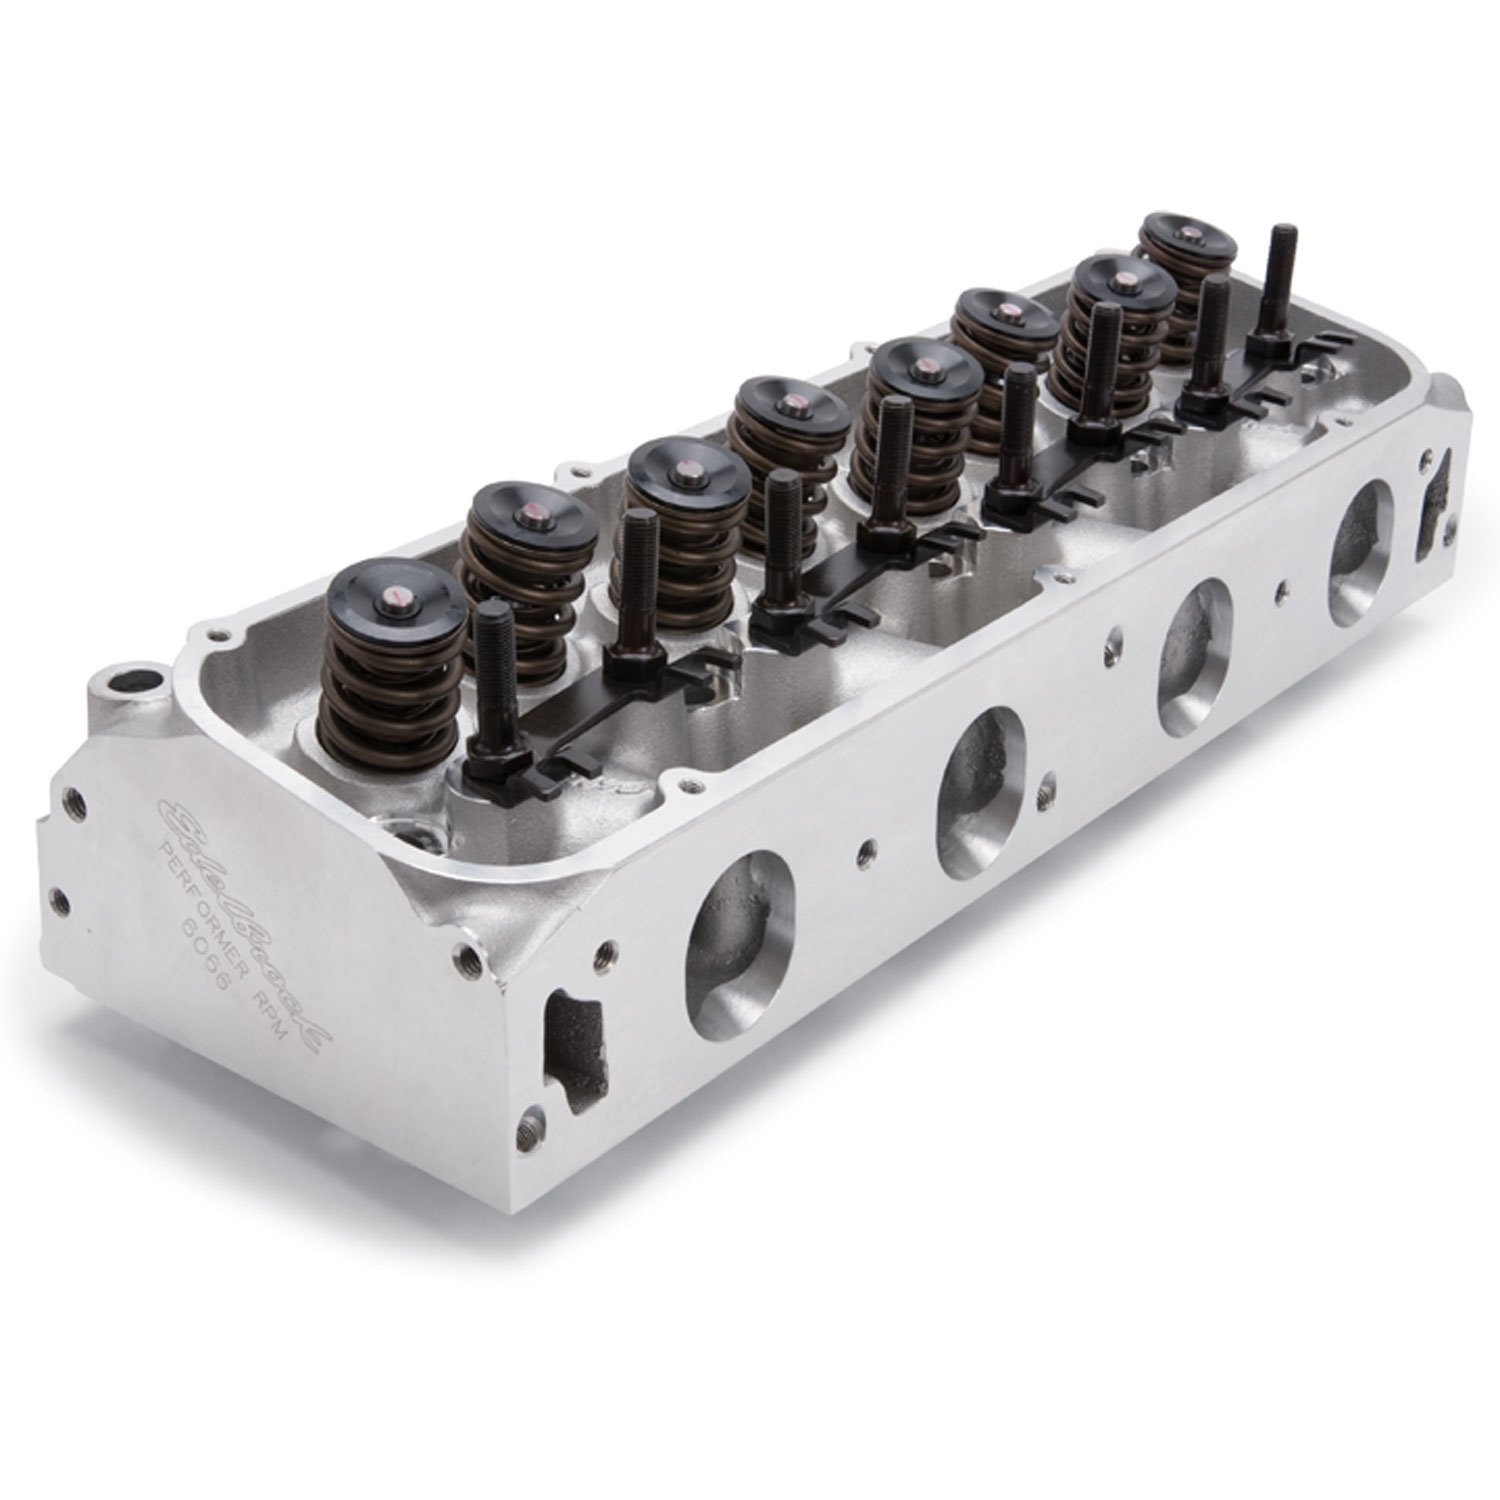 Performer RPM 460 Cylinder Head for Big Block Ford